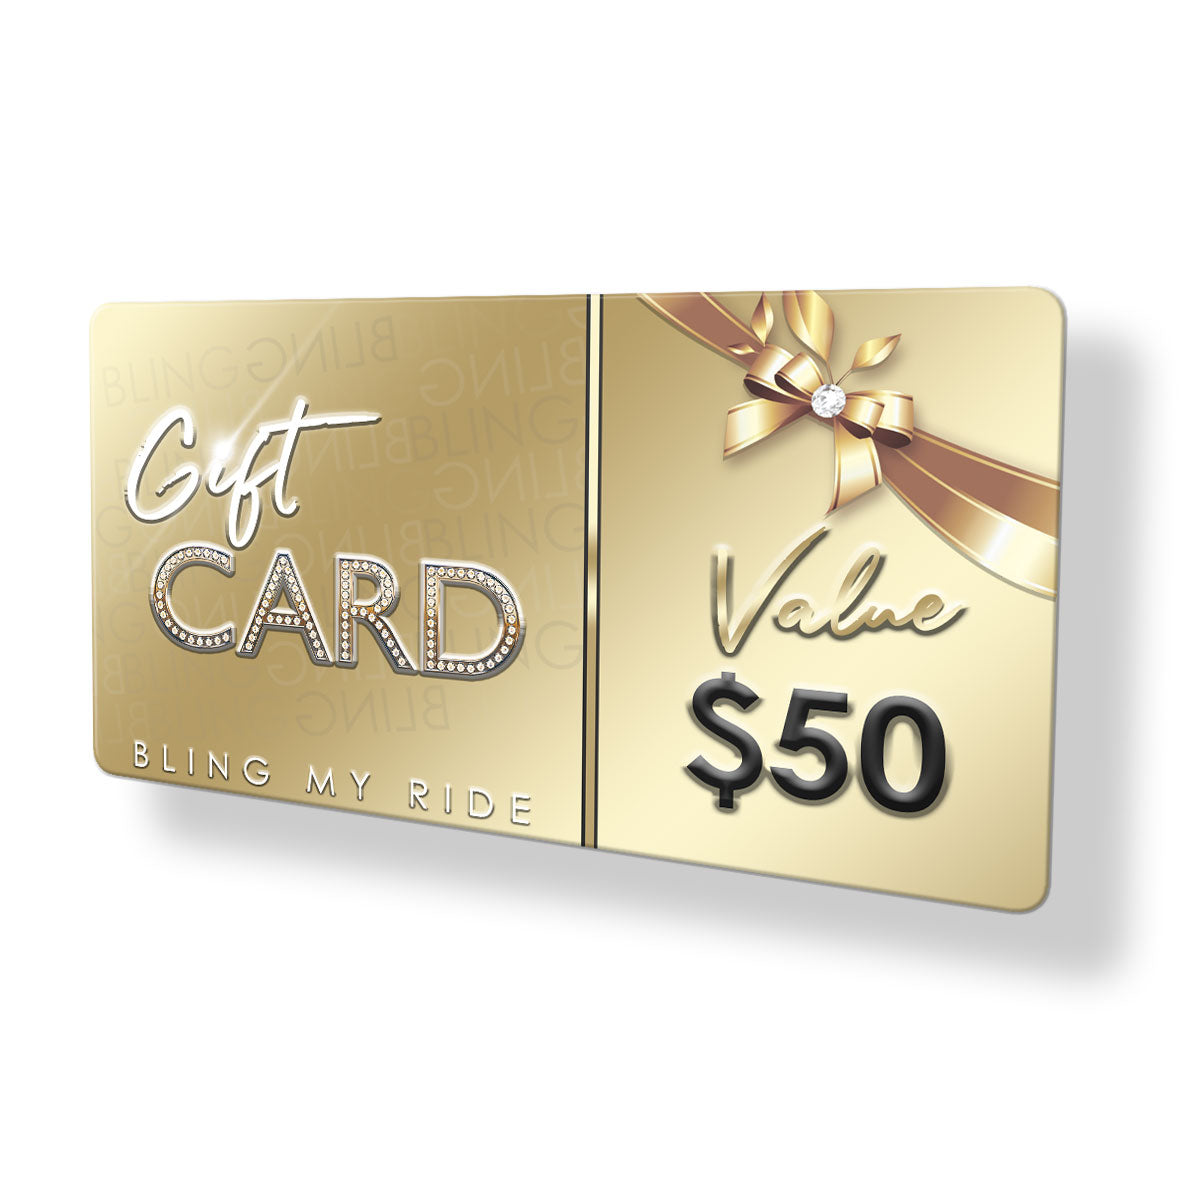 Bling My Ride gift card is ideal for birthday present or if you just looking for gift ideas